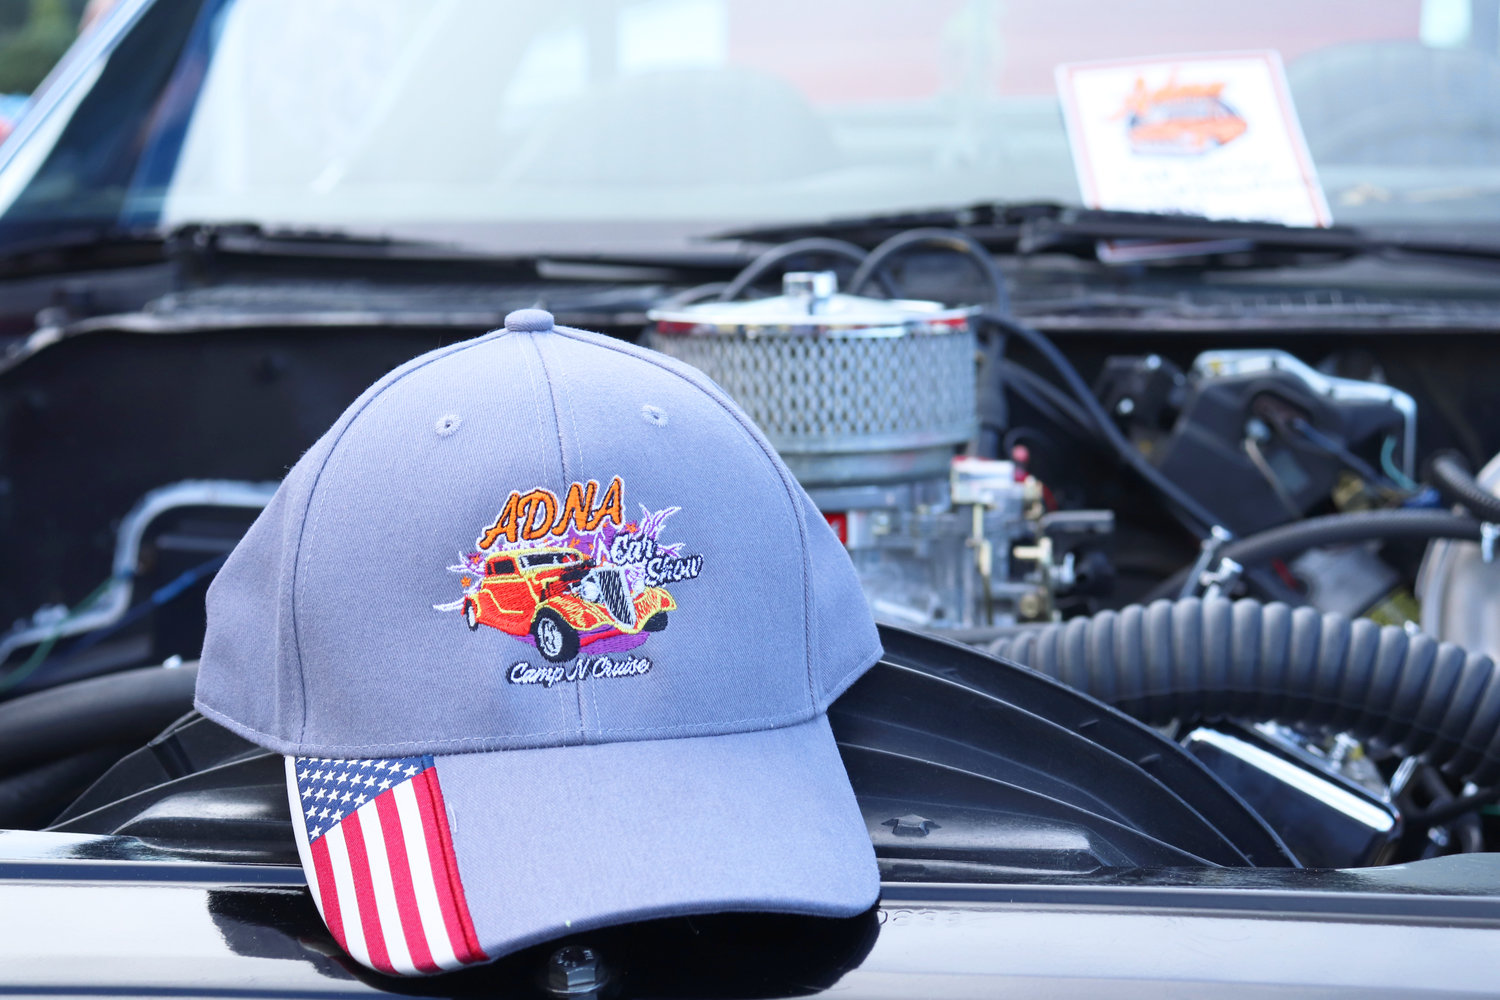 An event cap rests on an engine at the Adna Camp & Cruise Car Show in Adna on Friday.